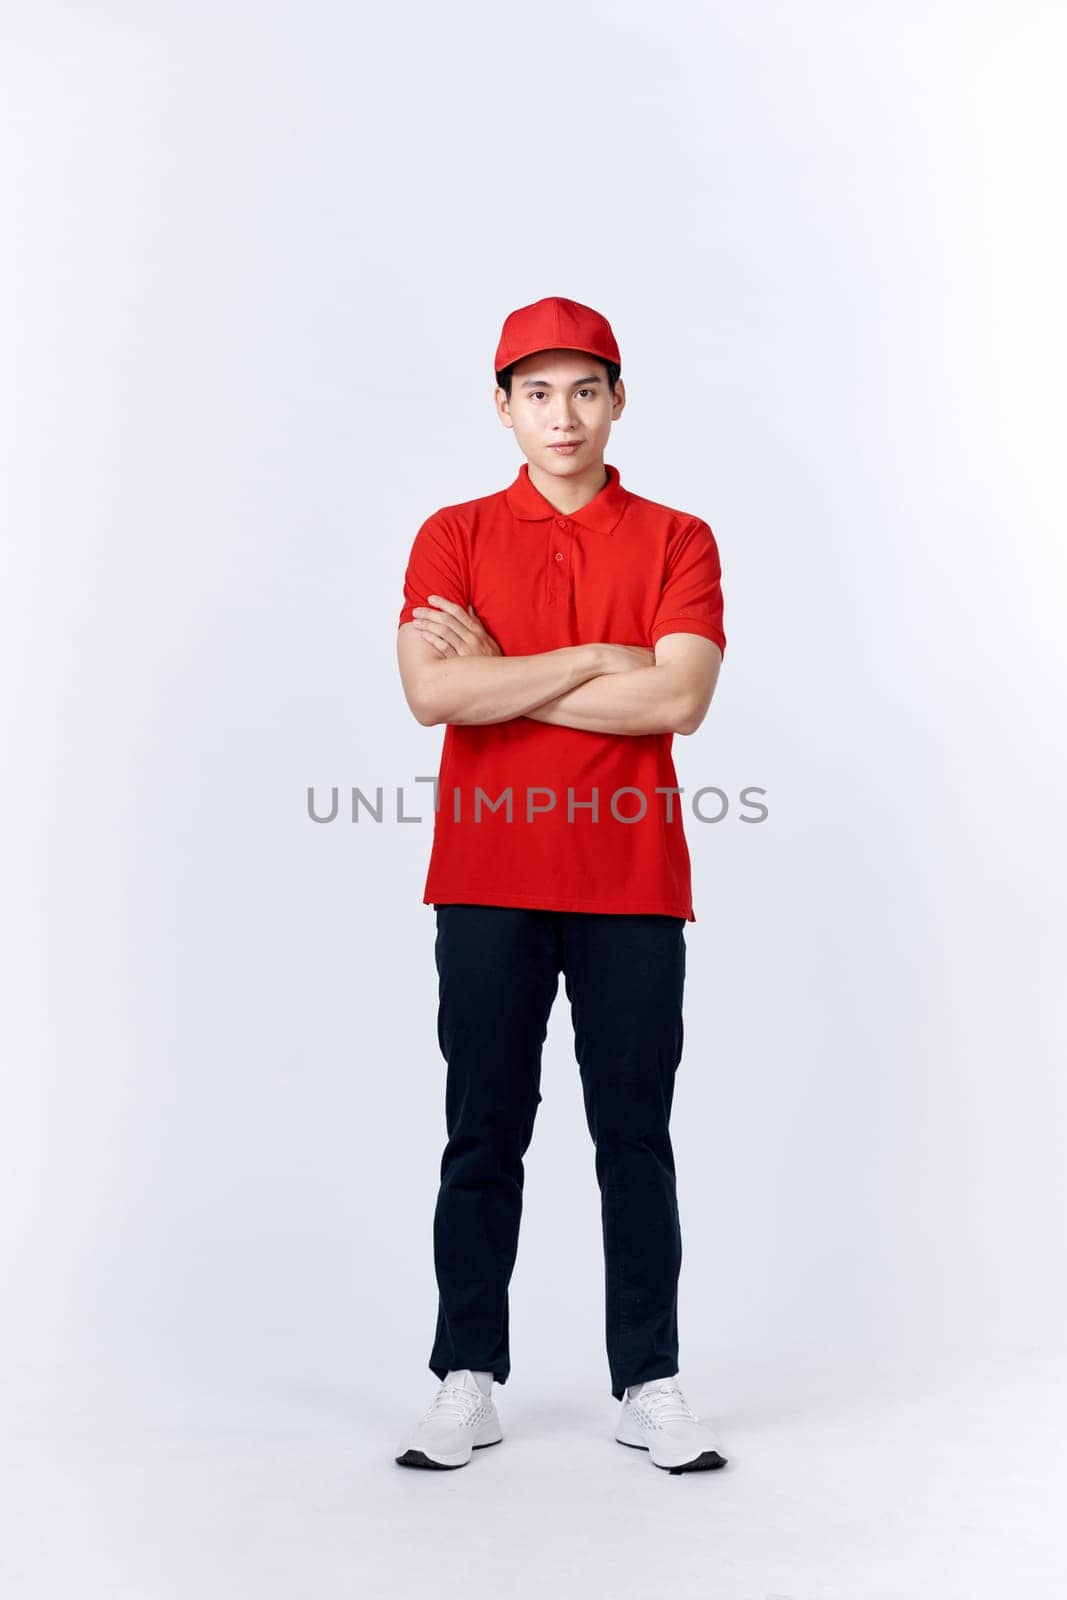 Smiling delivery man in red uniform standing with arm crossed - isolated on white background by makidotvn